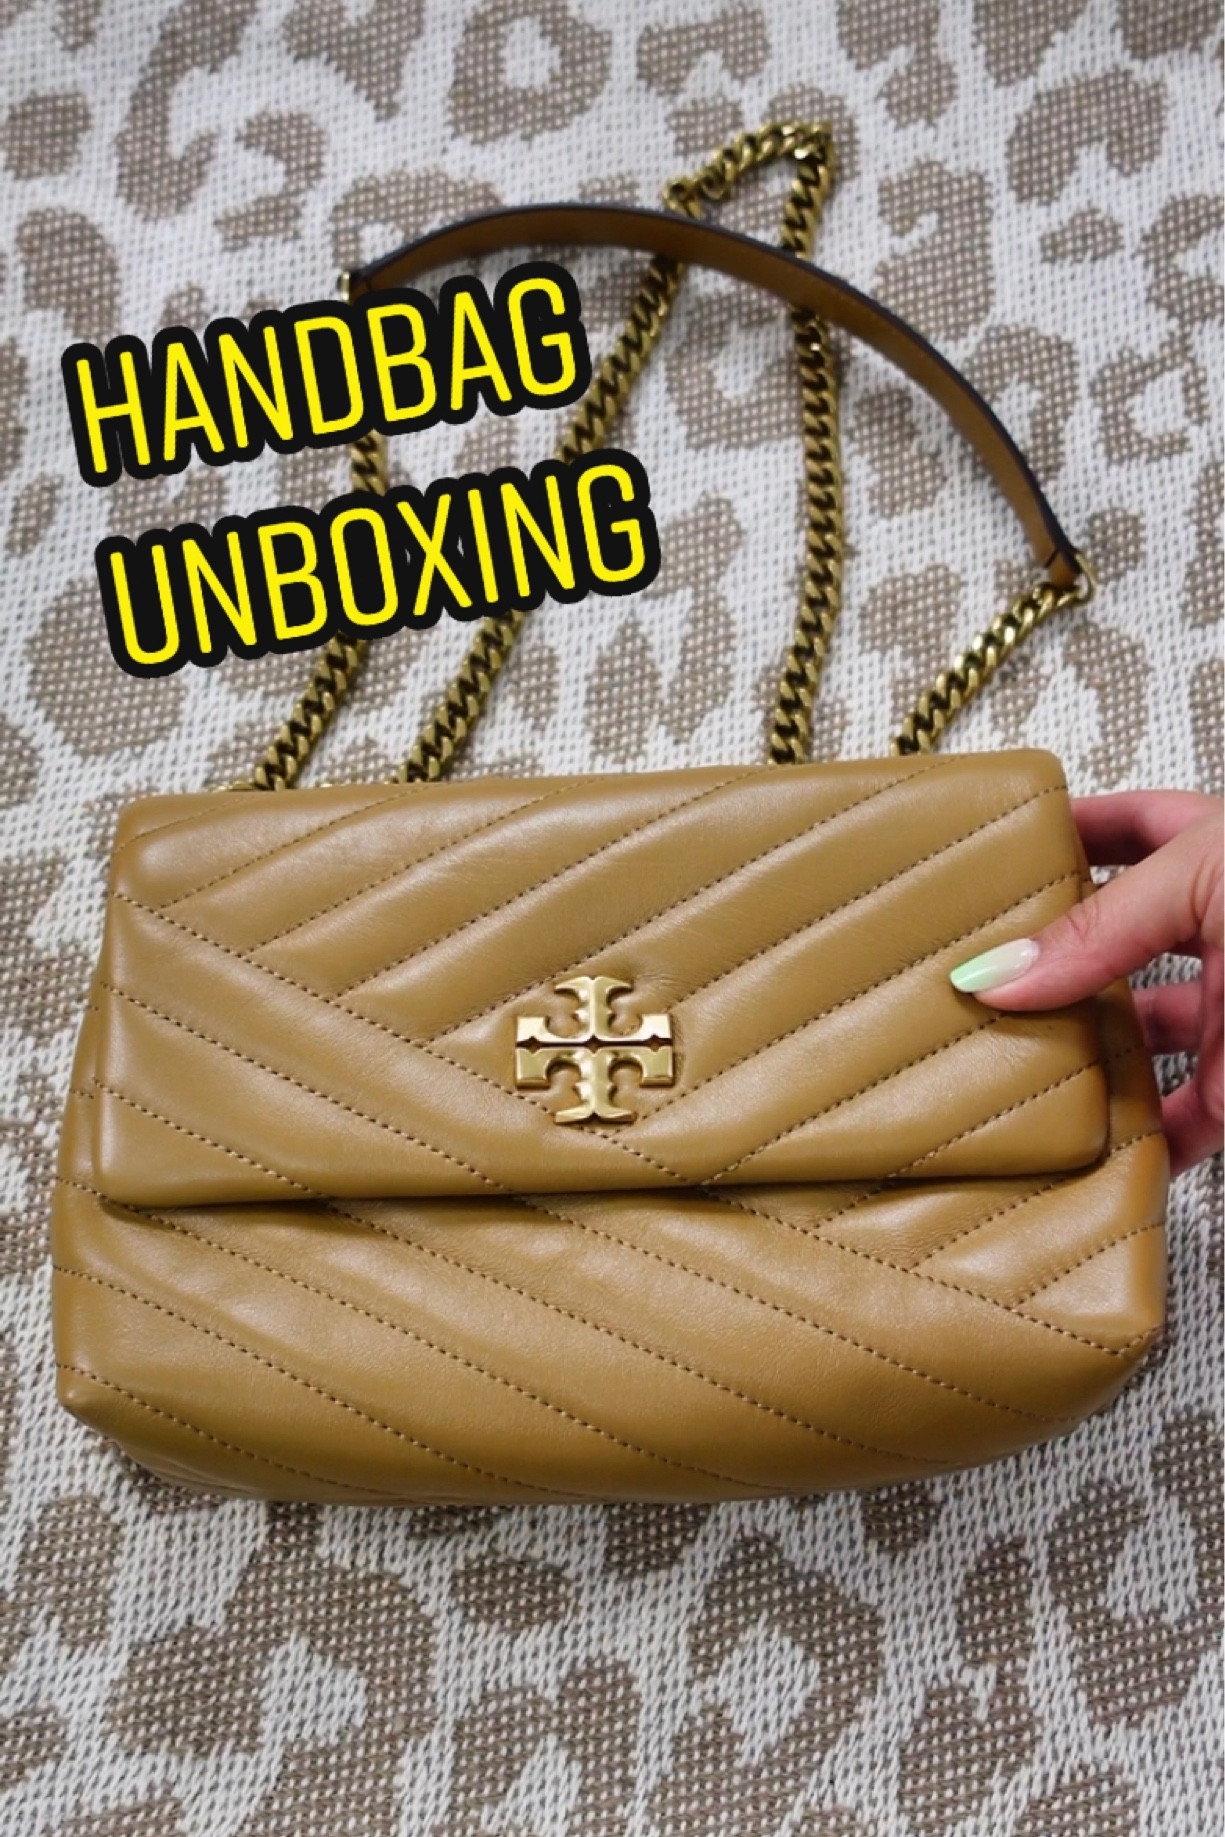 Unboxing my new Louis Vuitton High rise bag! Its soooo pretty